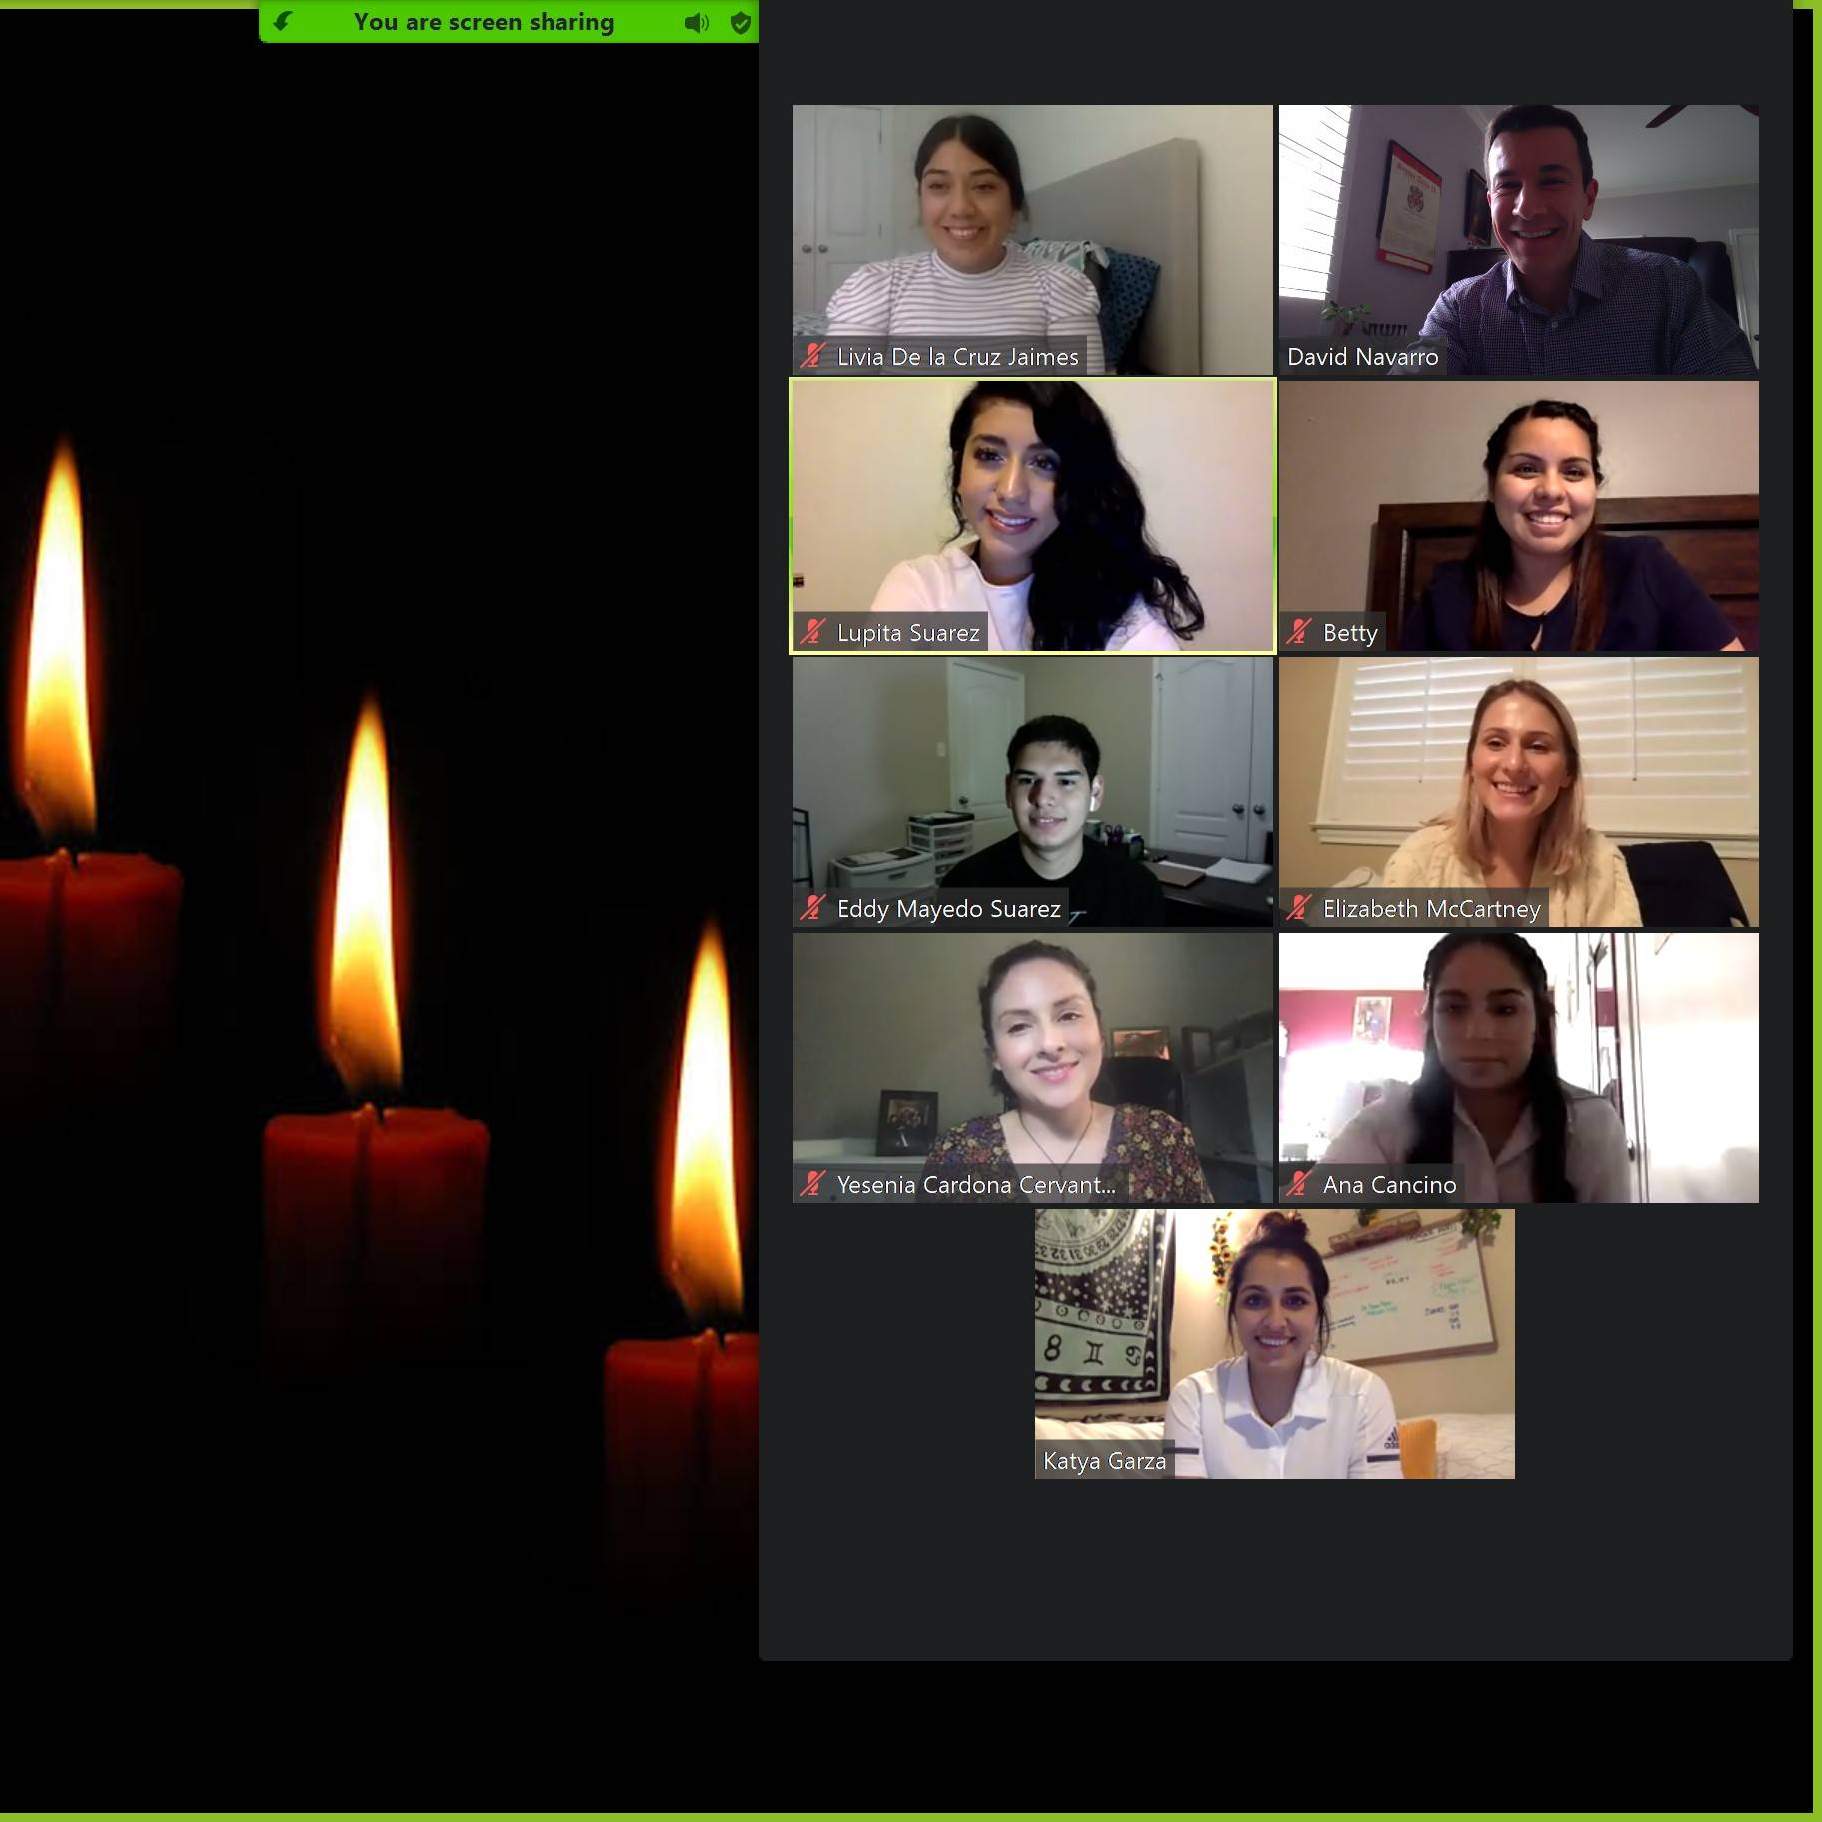 7 women and 2 men, candles